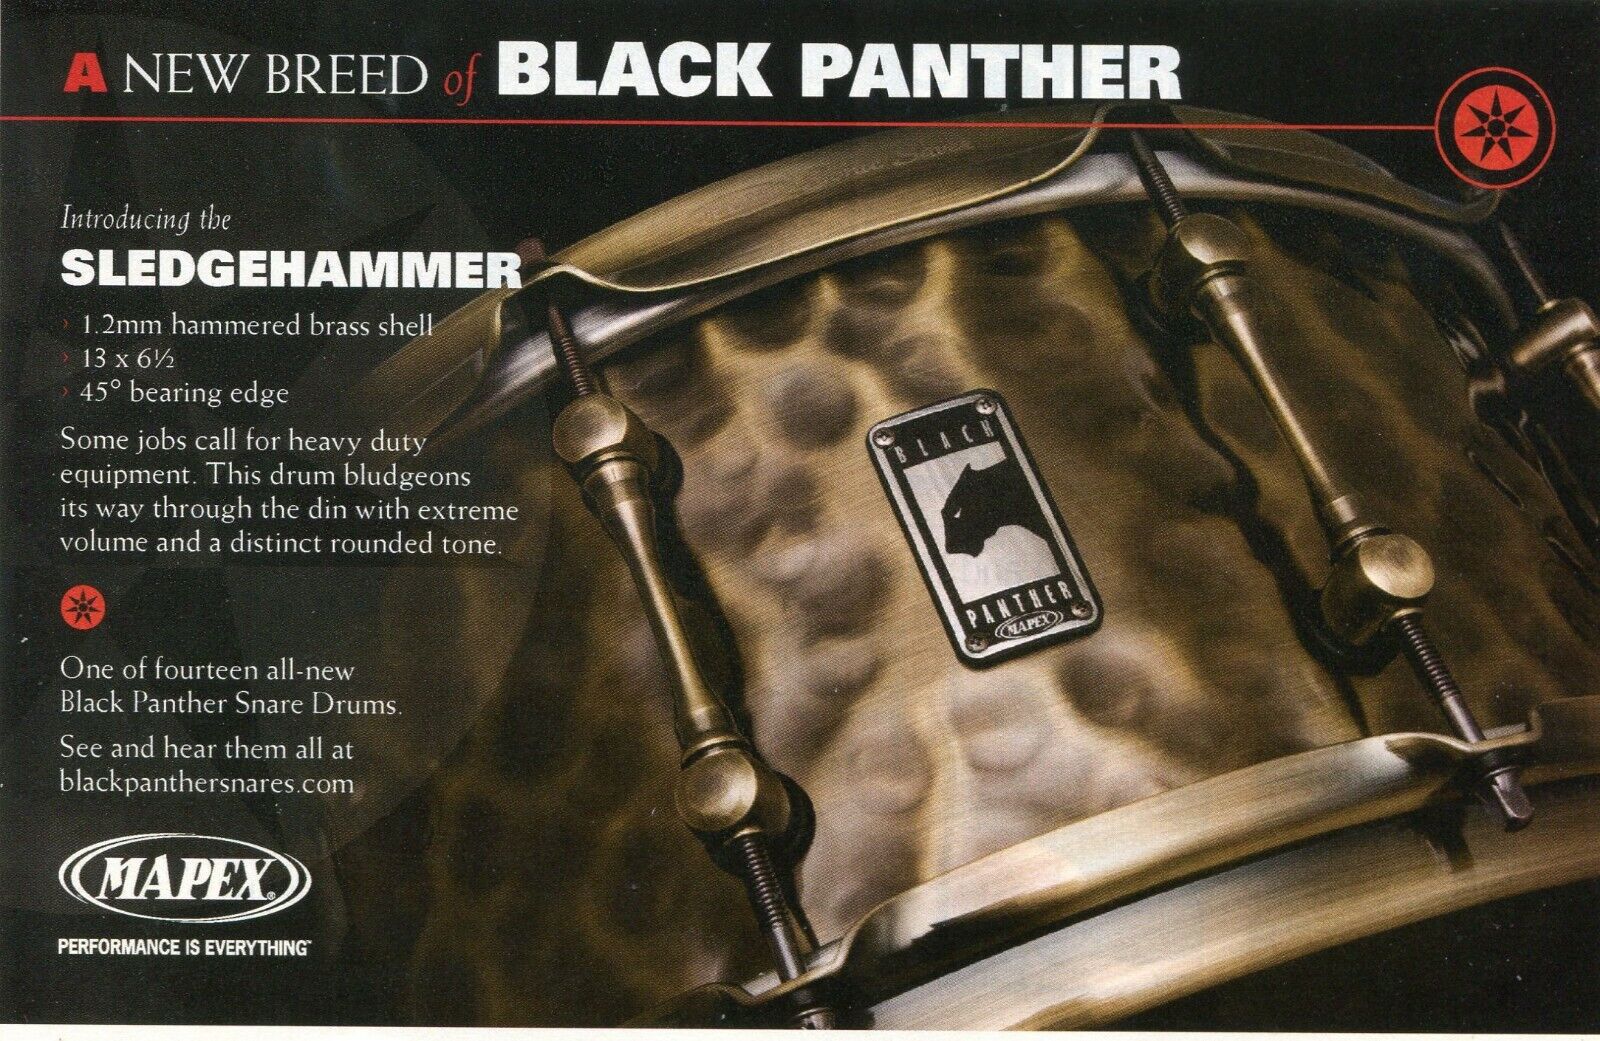 2010 small Print Ad of Mapex Black Panther Sledgehammer Snare Drum